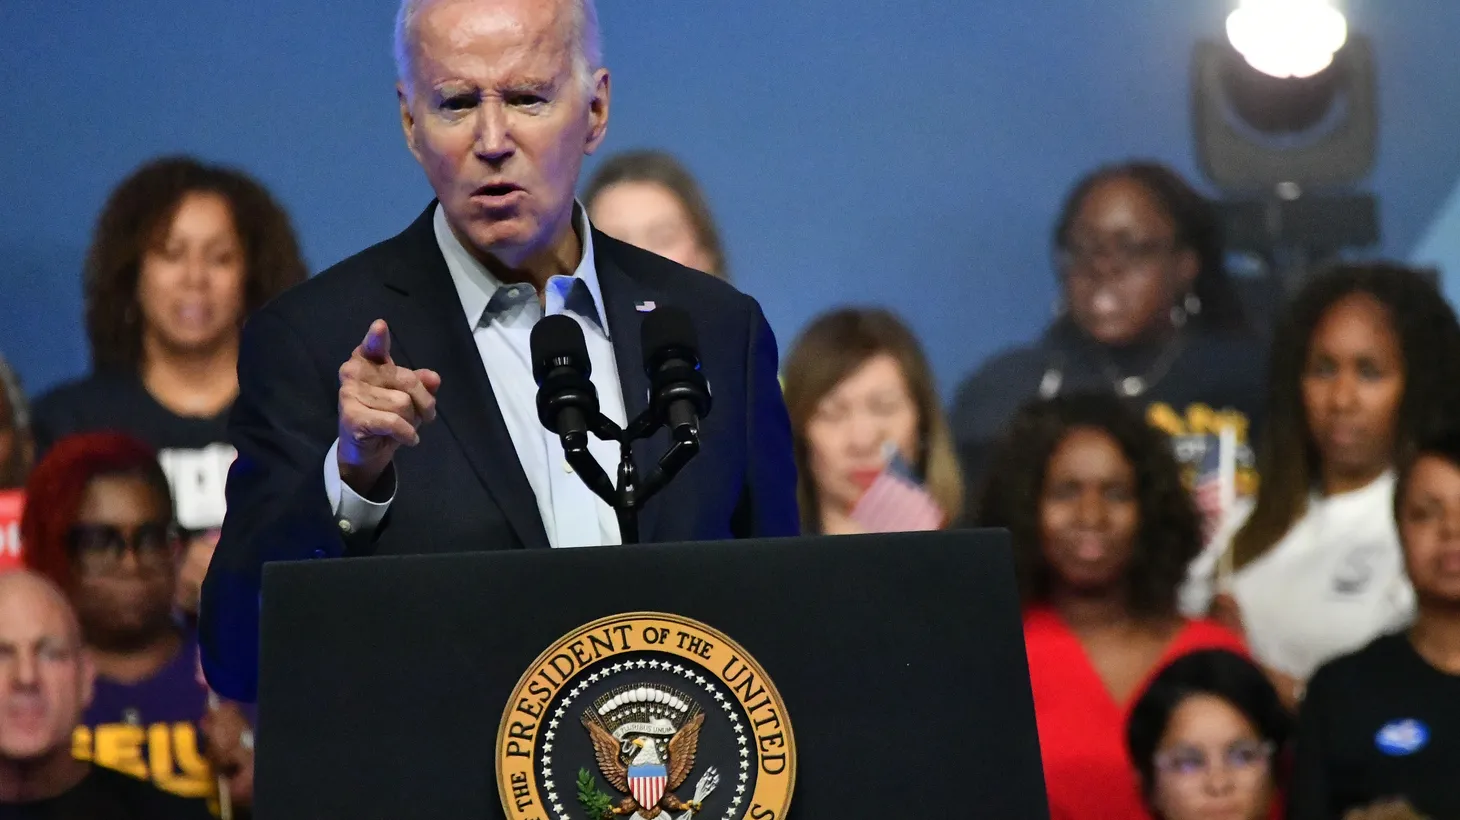 President Joseph Biden speaks on stage during a rally at the Pennsylvania Convention center in Philadelphia, PA, on June 17, 2023. This marks the first event in his 2024 presidential campaign.